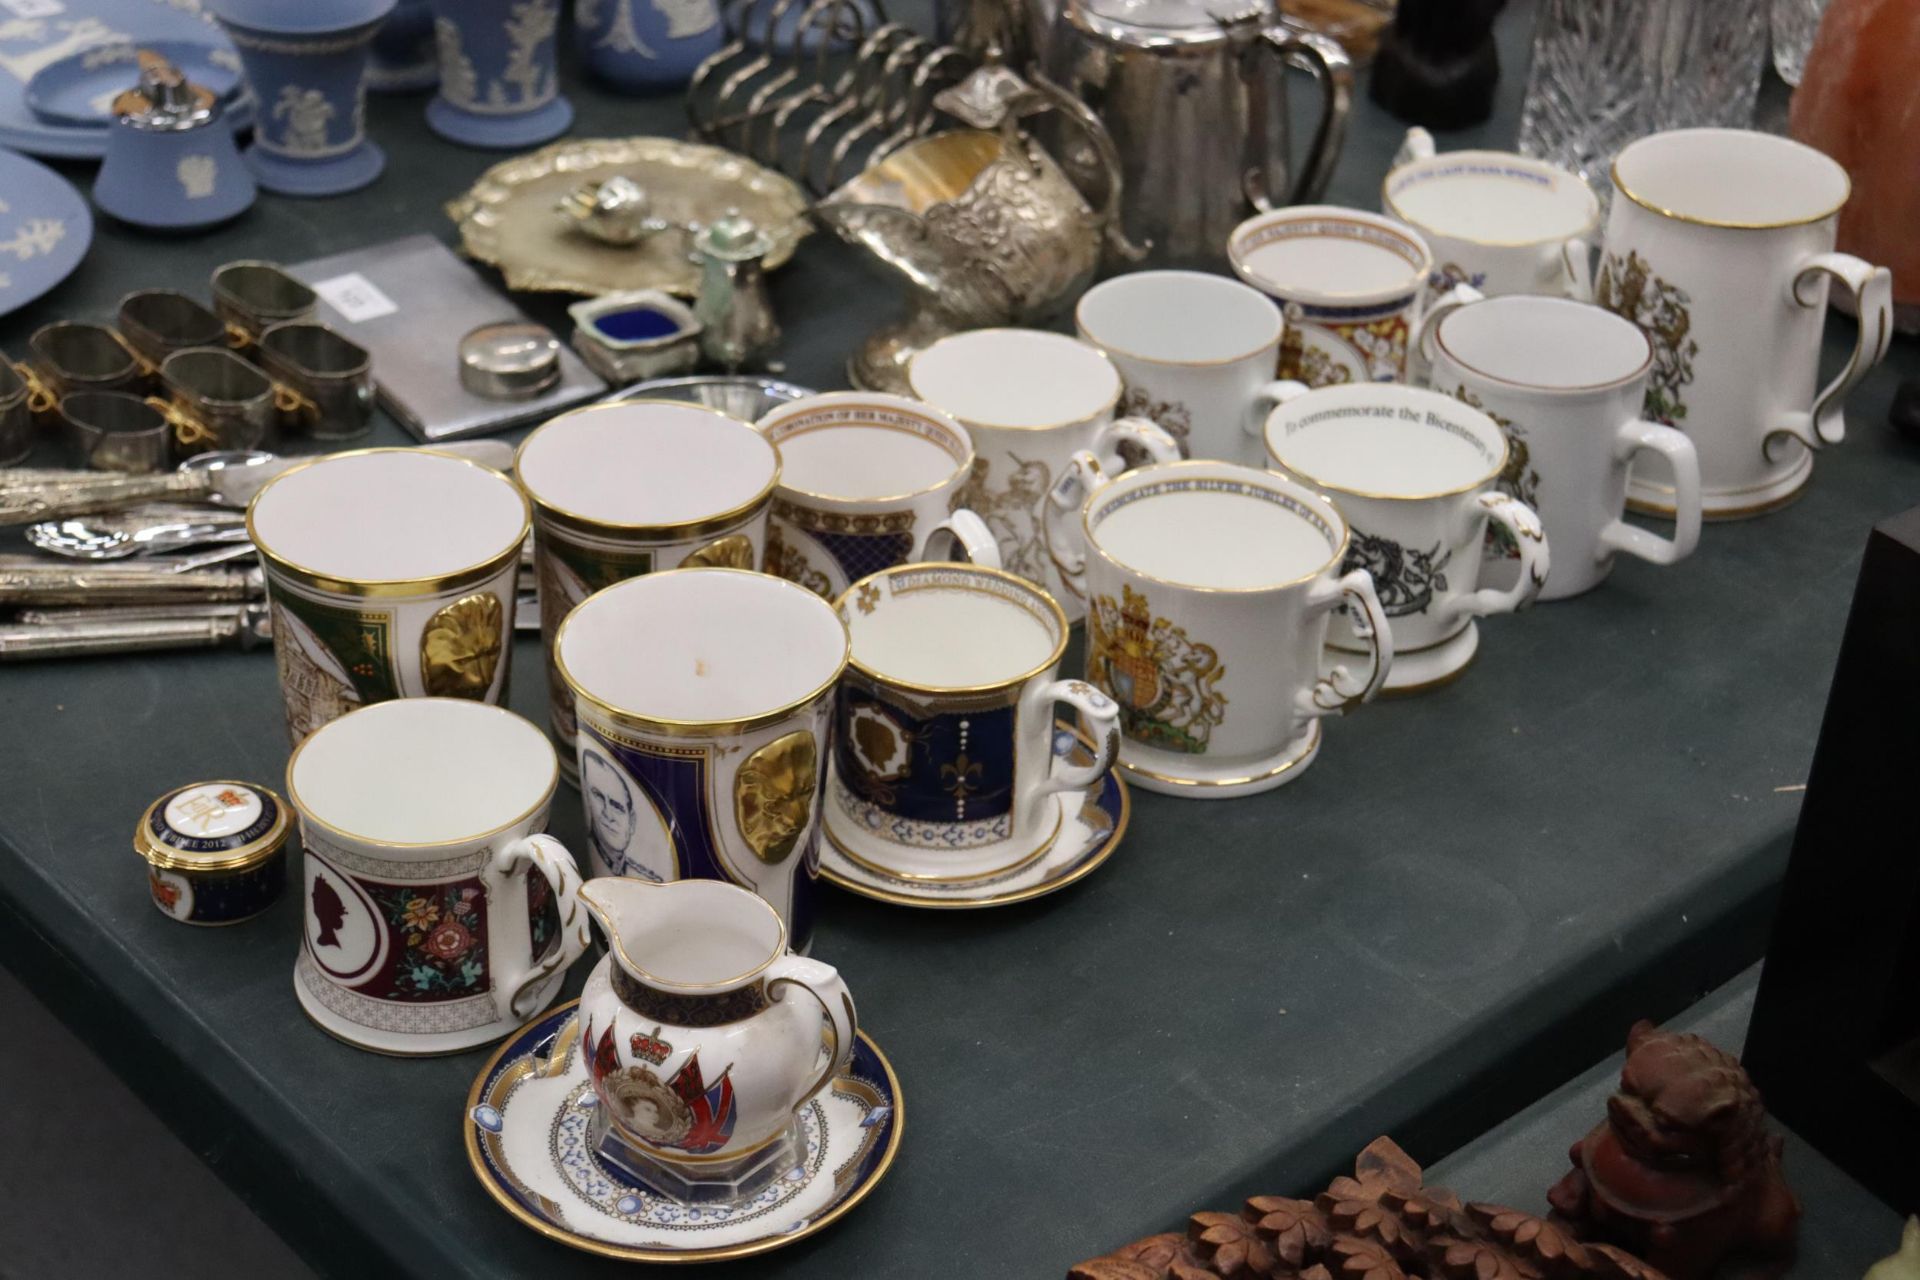 A LARGE QUANTITY OF COMMEMORATIVE MUGS AND CUPS TO INCUDE ROYALTY